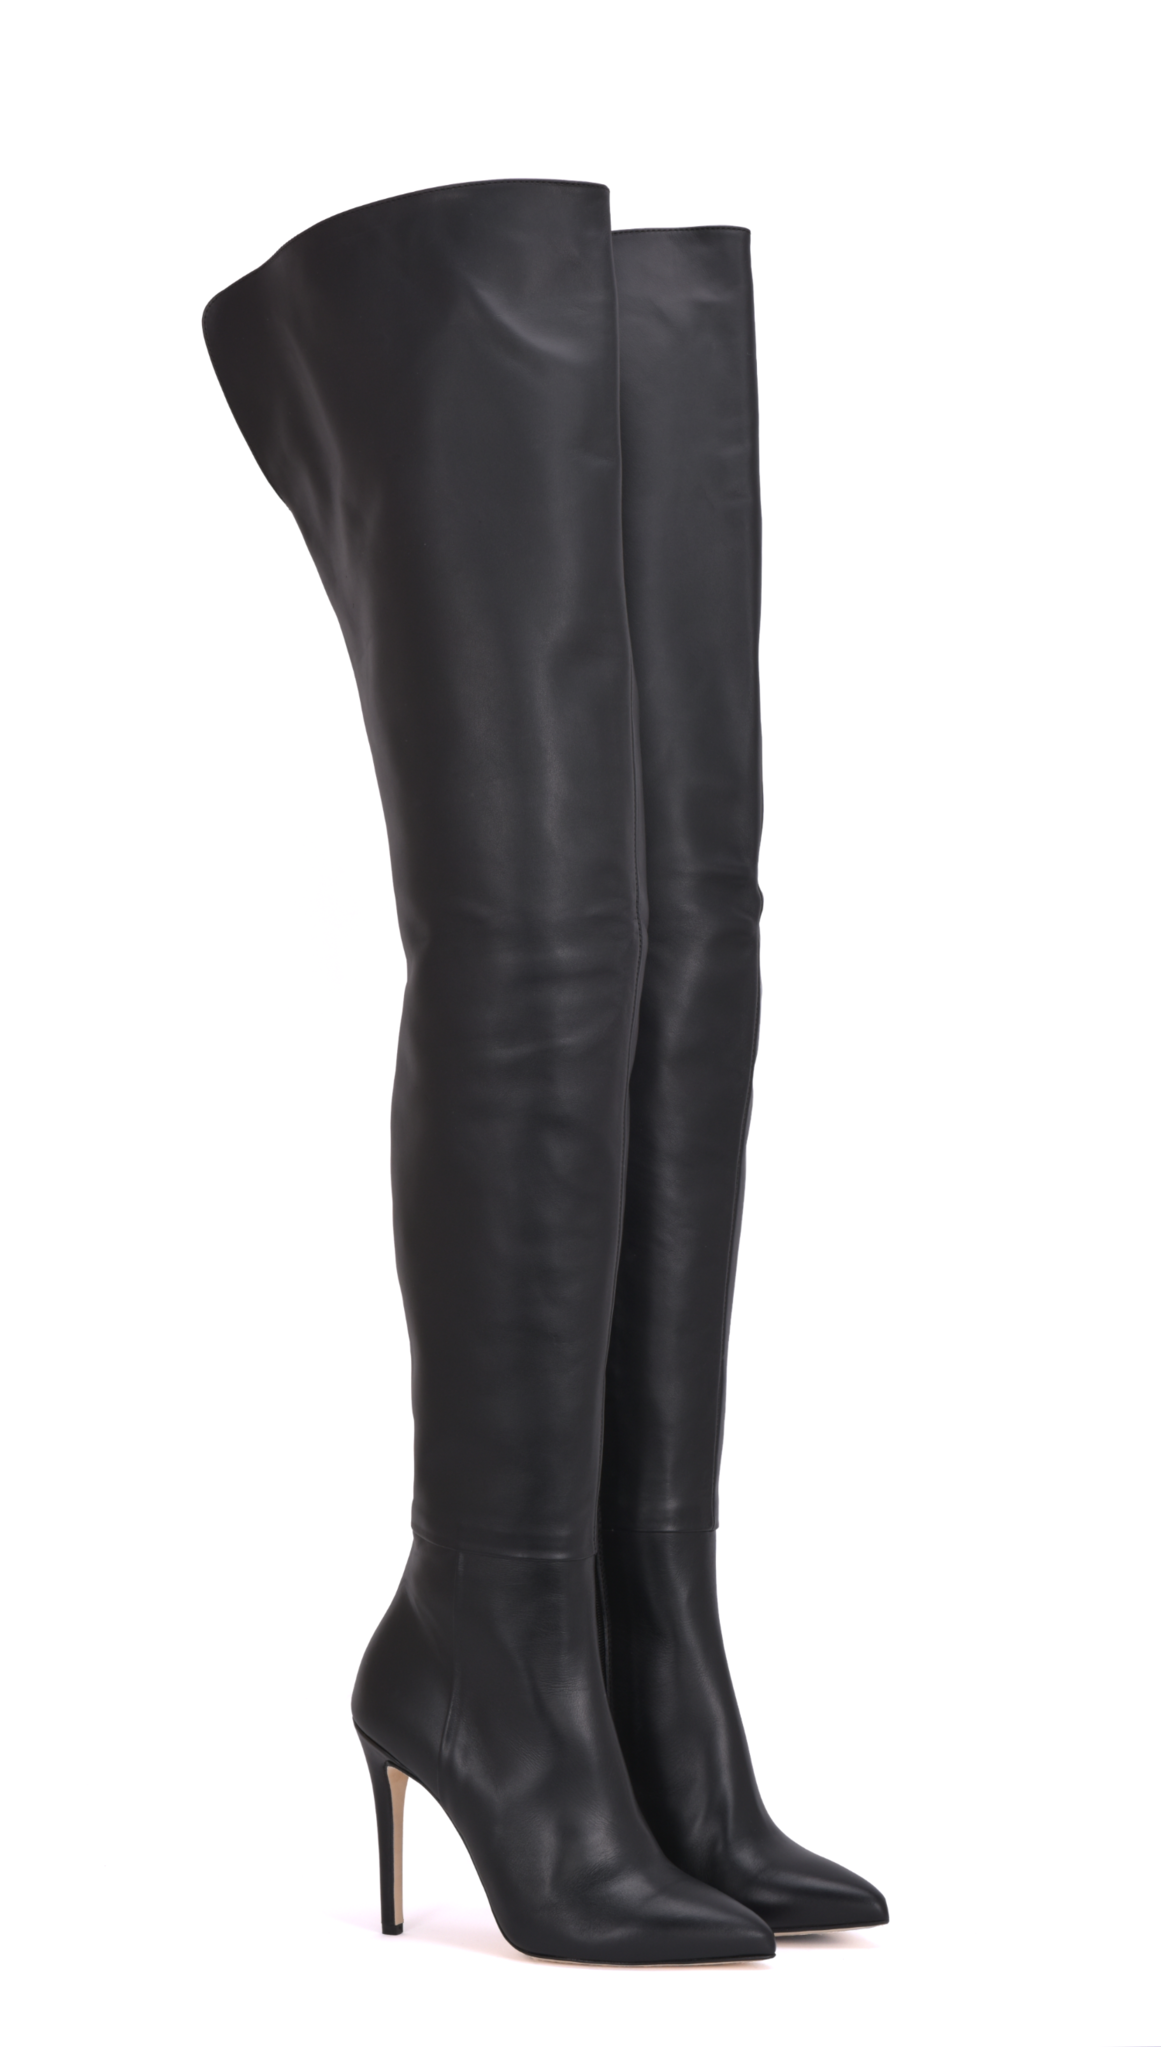 Crotch high boots with 10cm heels in real leather - Italian High Heels ...